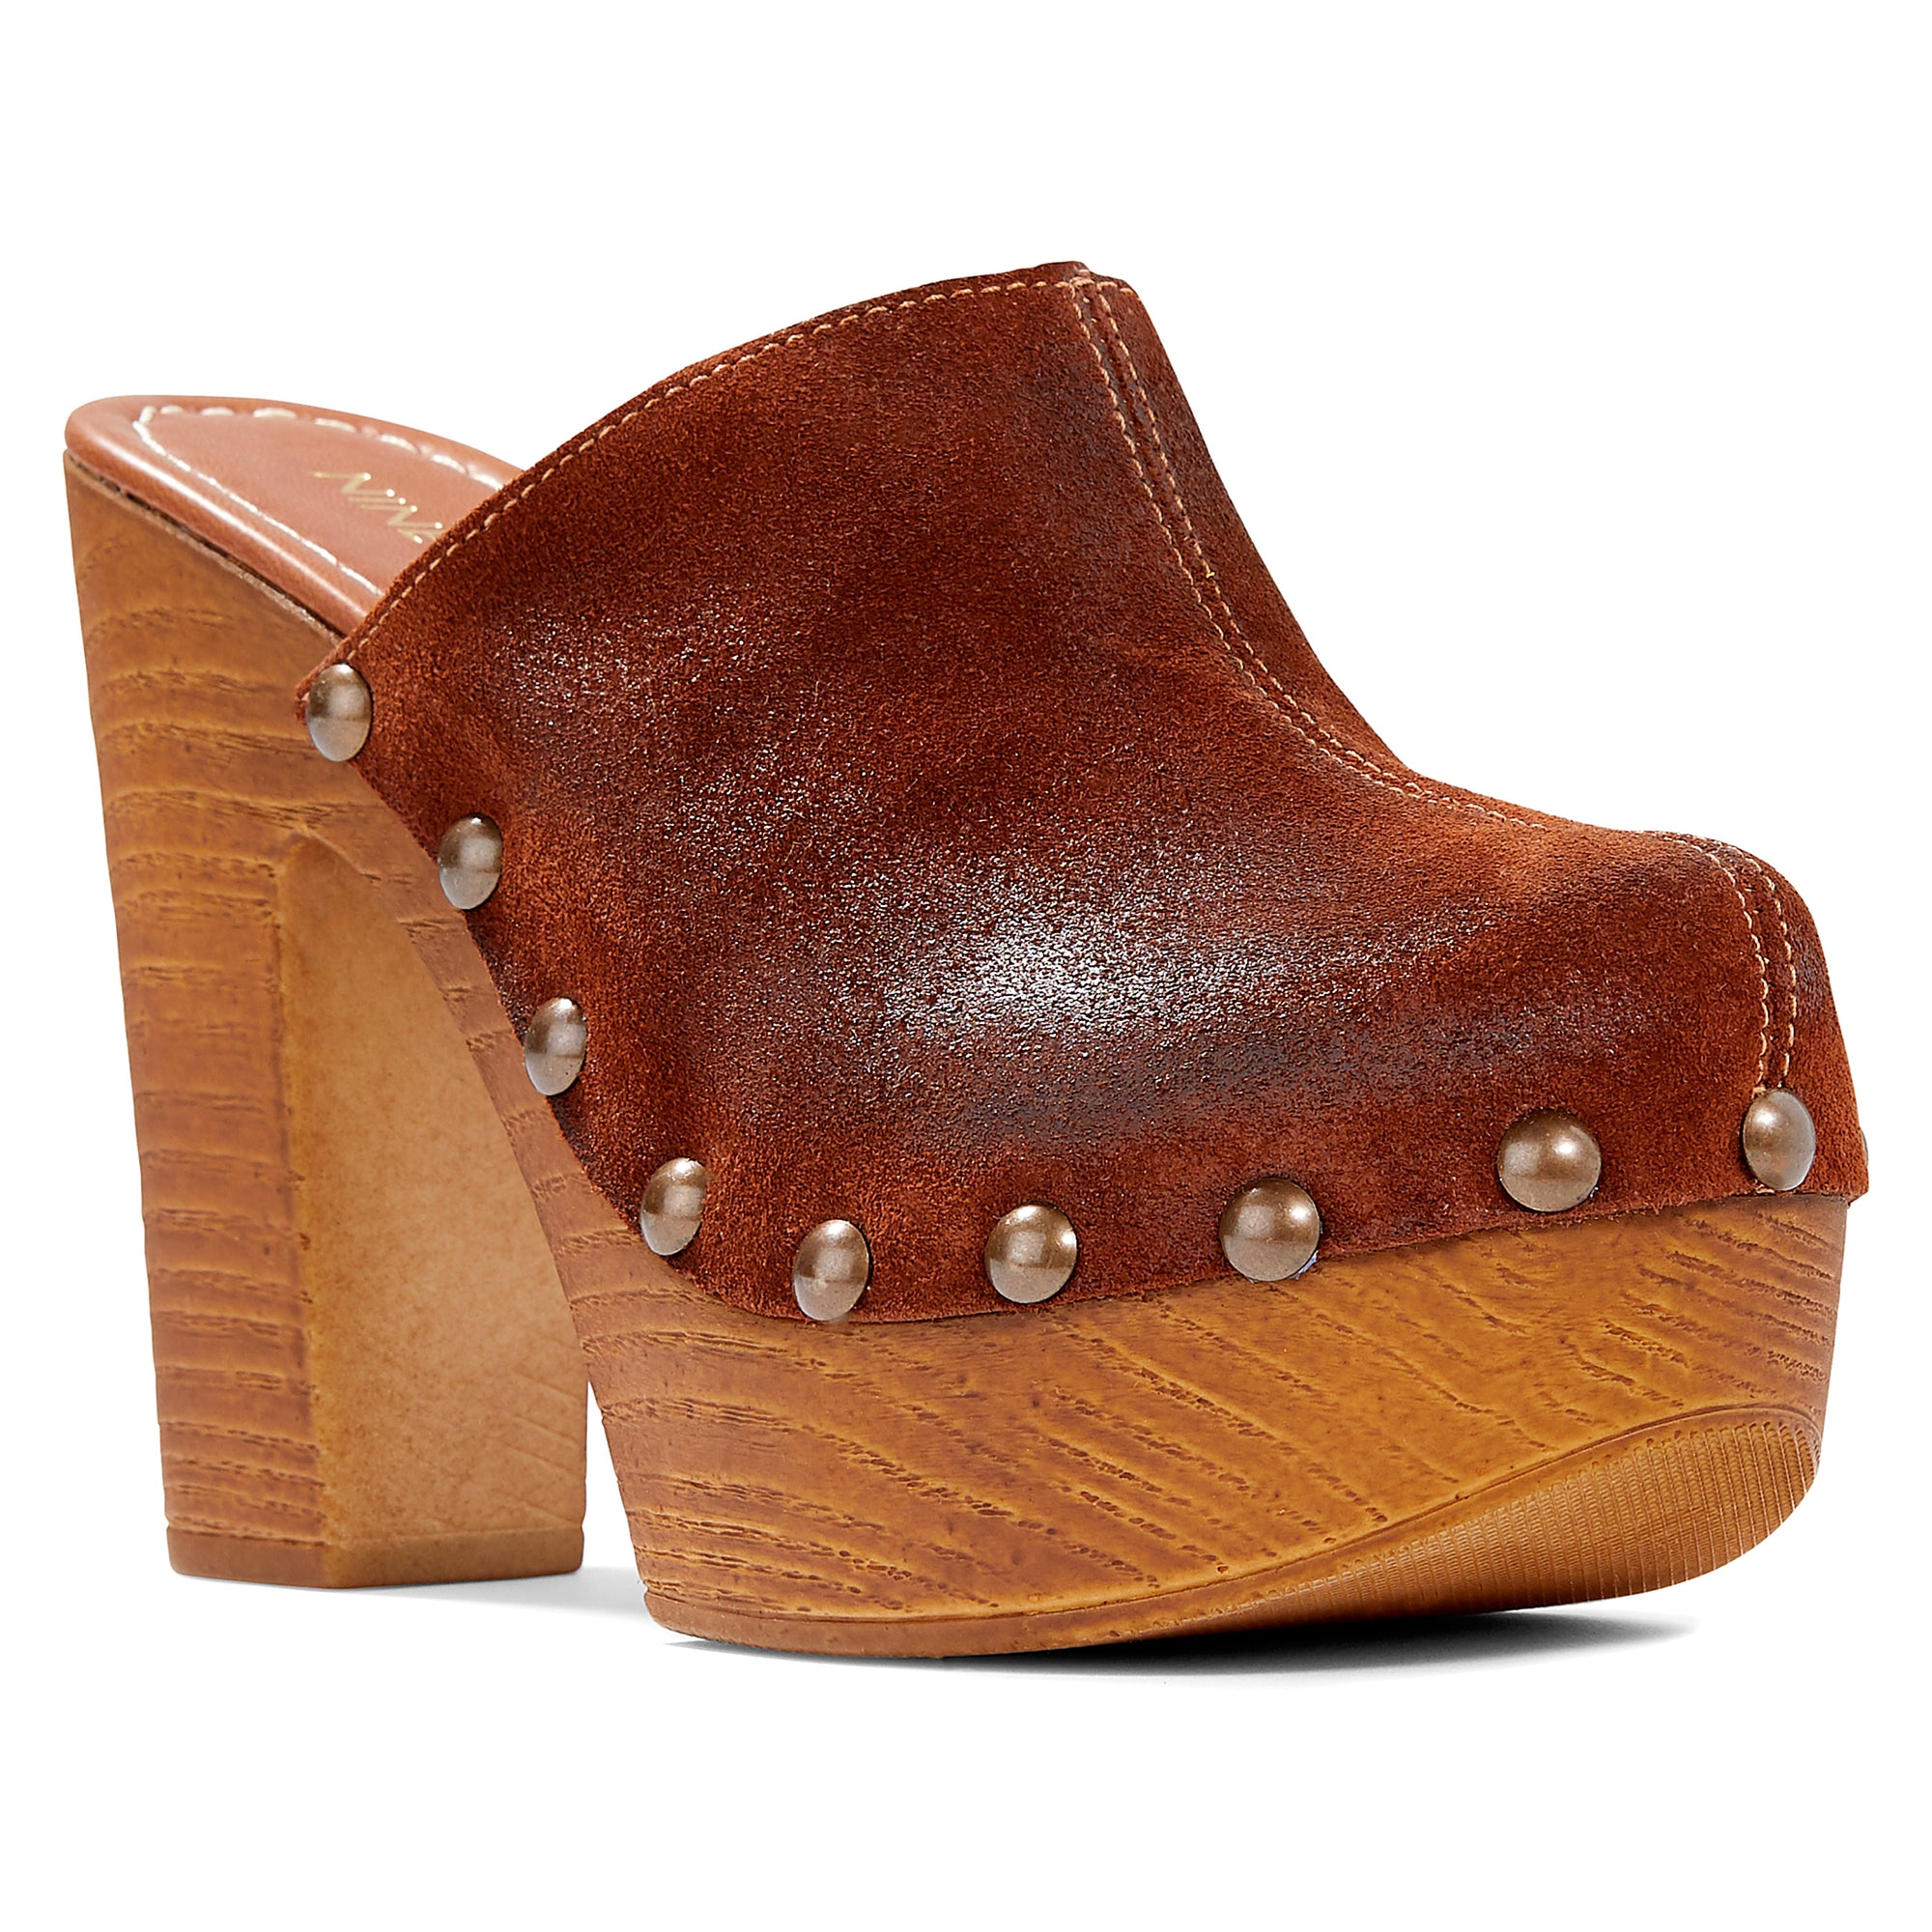 cheap womens clogs and mules